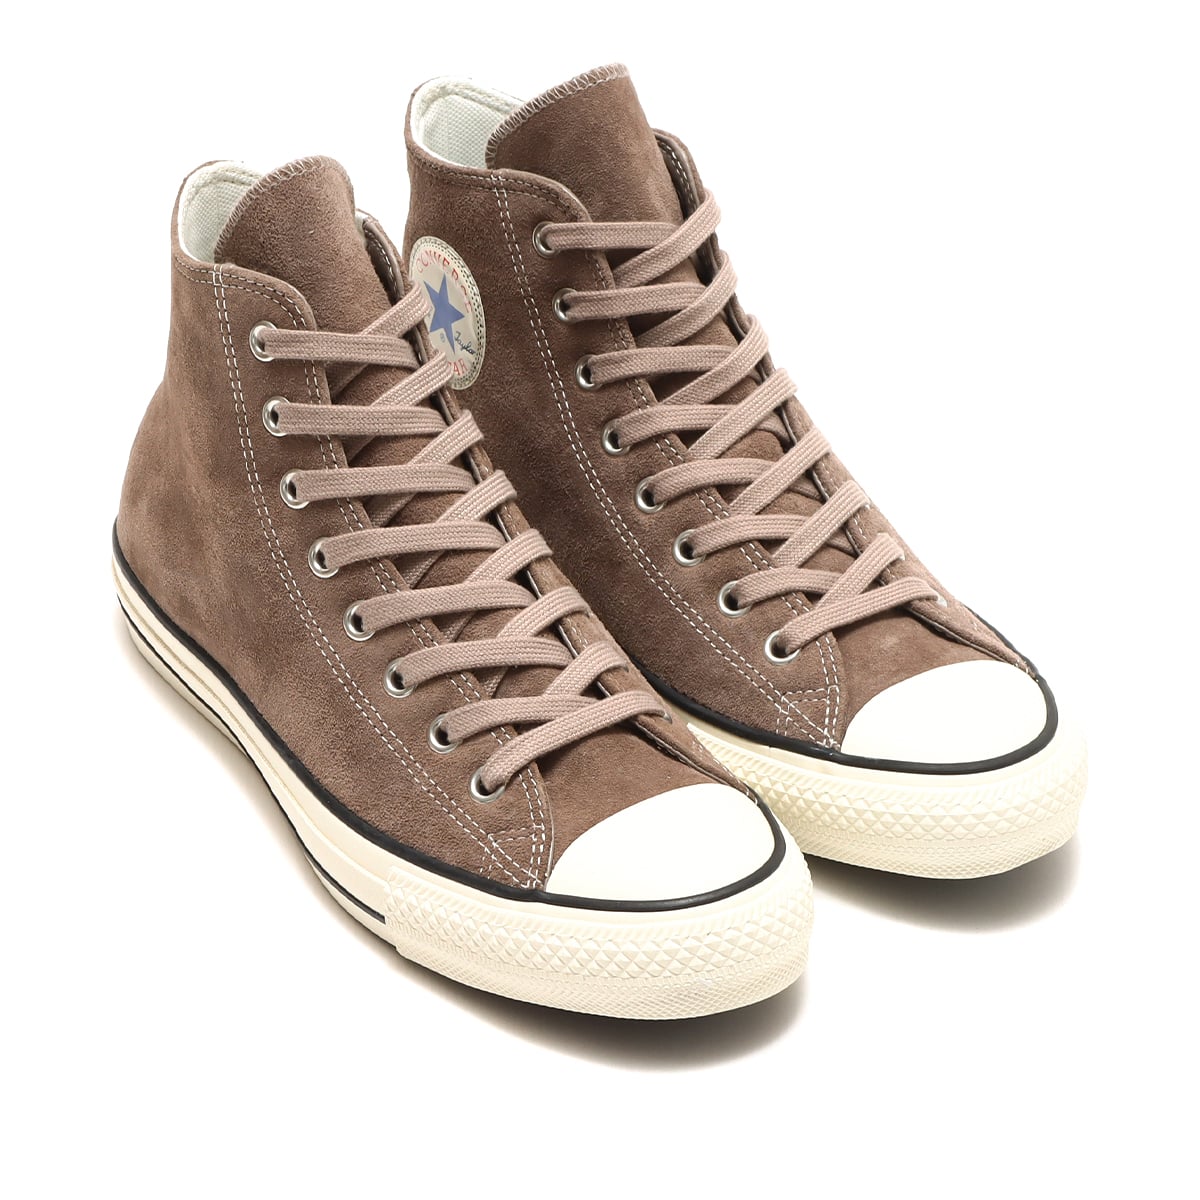 CONVERSE ALL STAR 100 WR WV SUEDE HI TAUPE 22FW-I